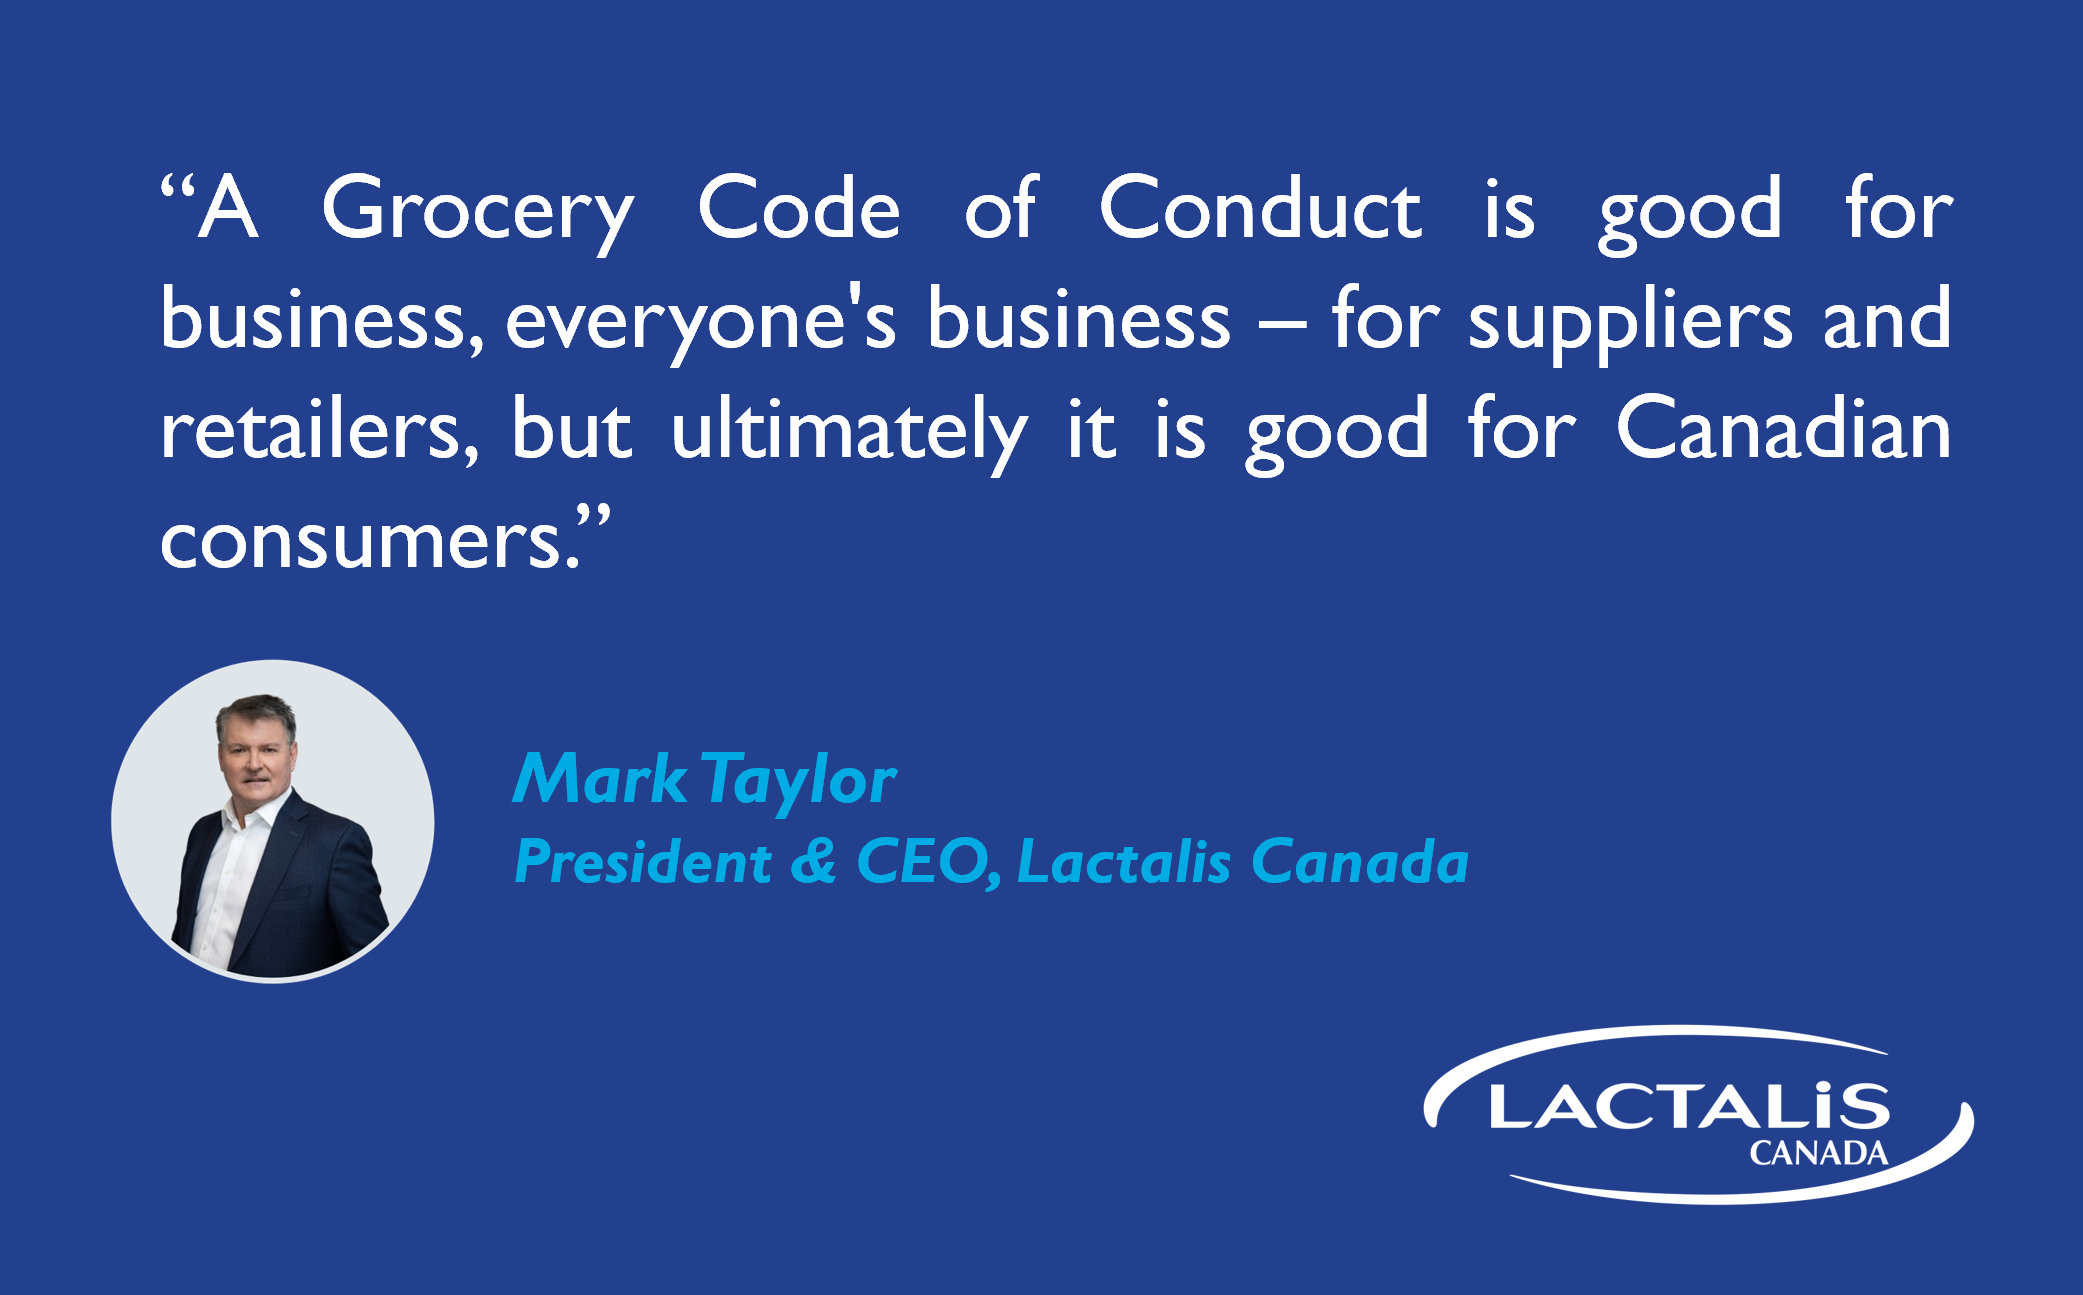 Lactalis Canada Applauds Grocery Industry’s Collaboration to Implement First-Ever Canadian Grocery Code of Conduct 